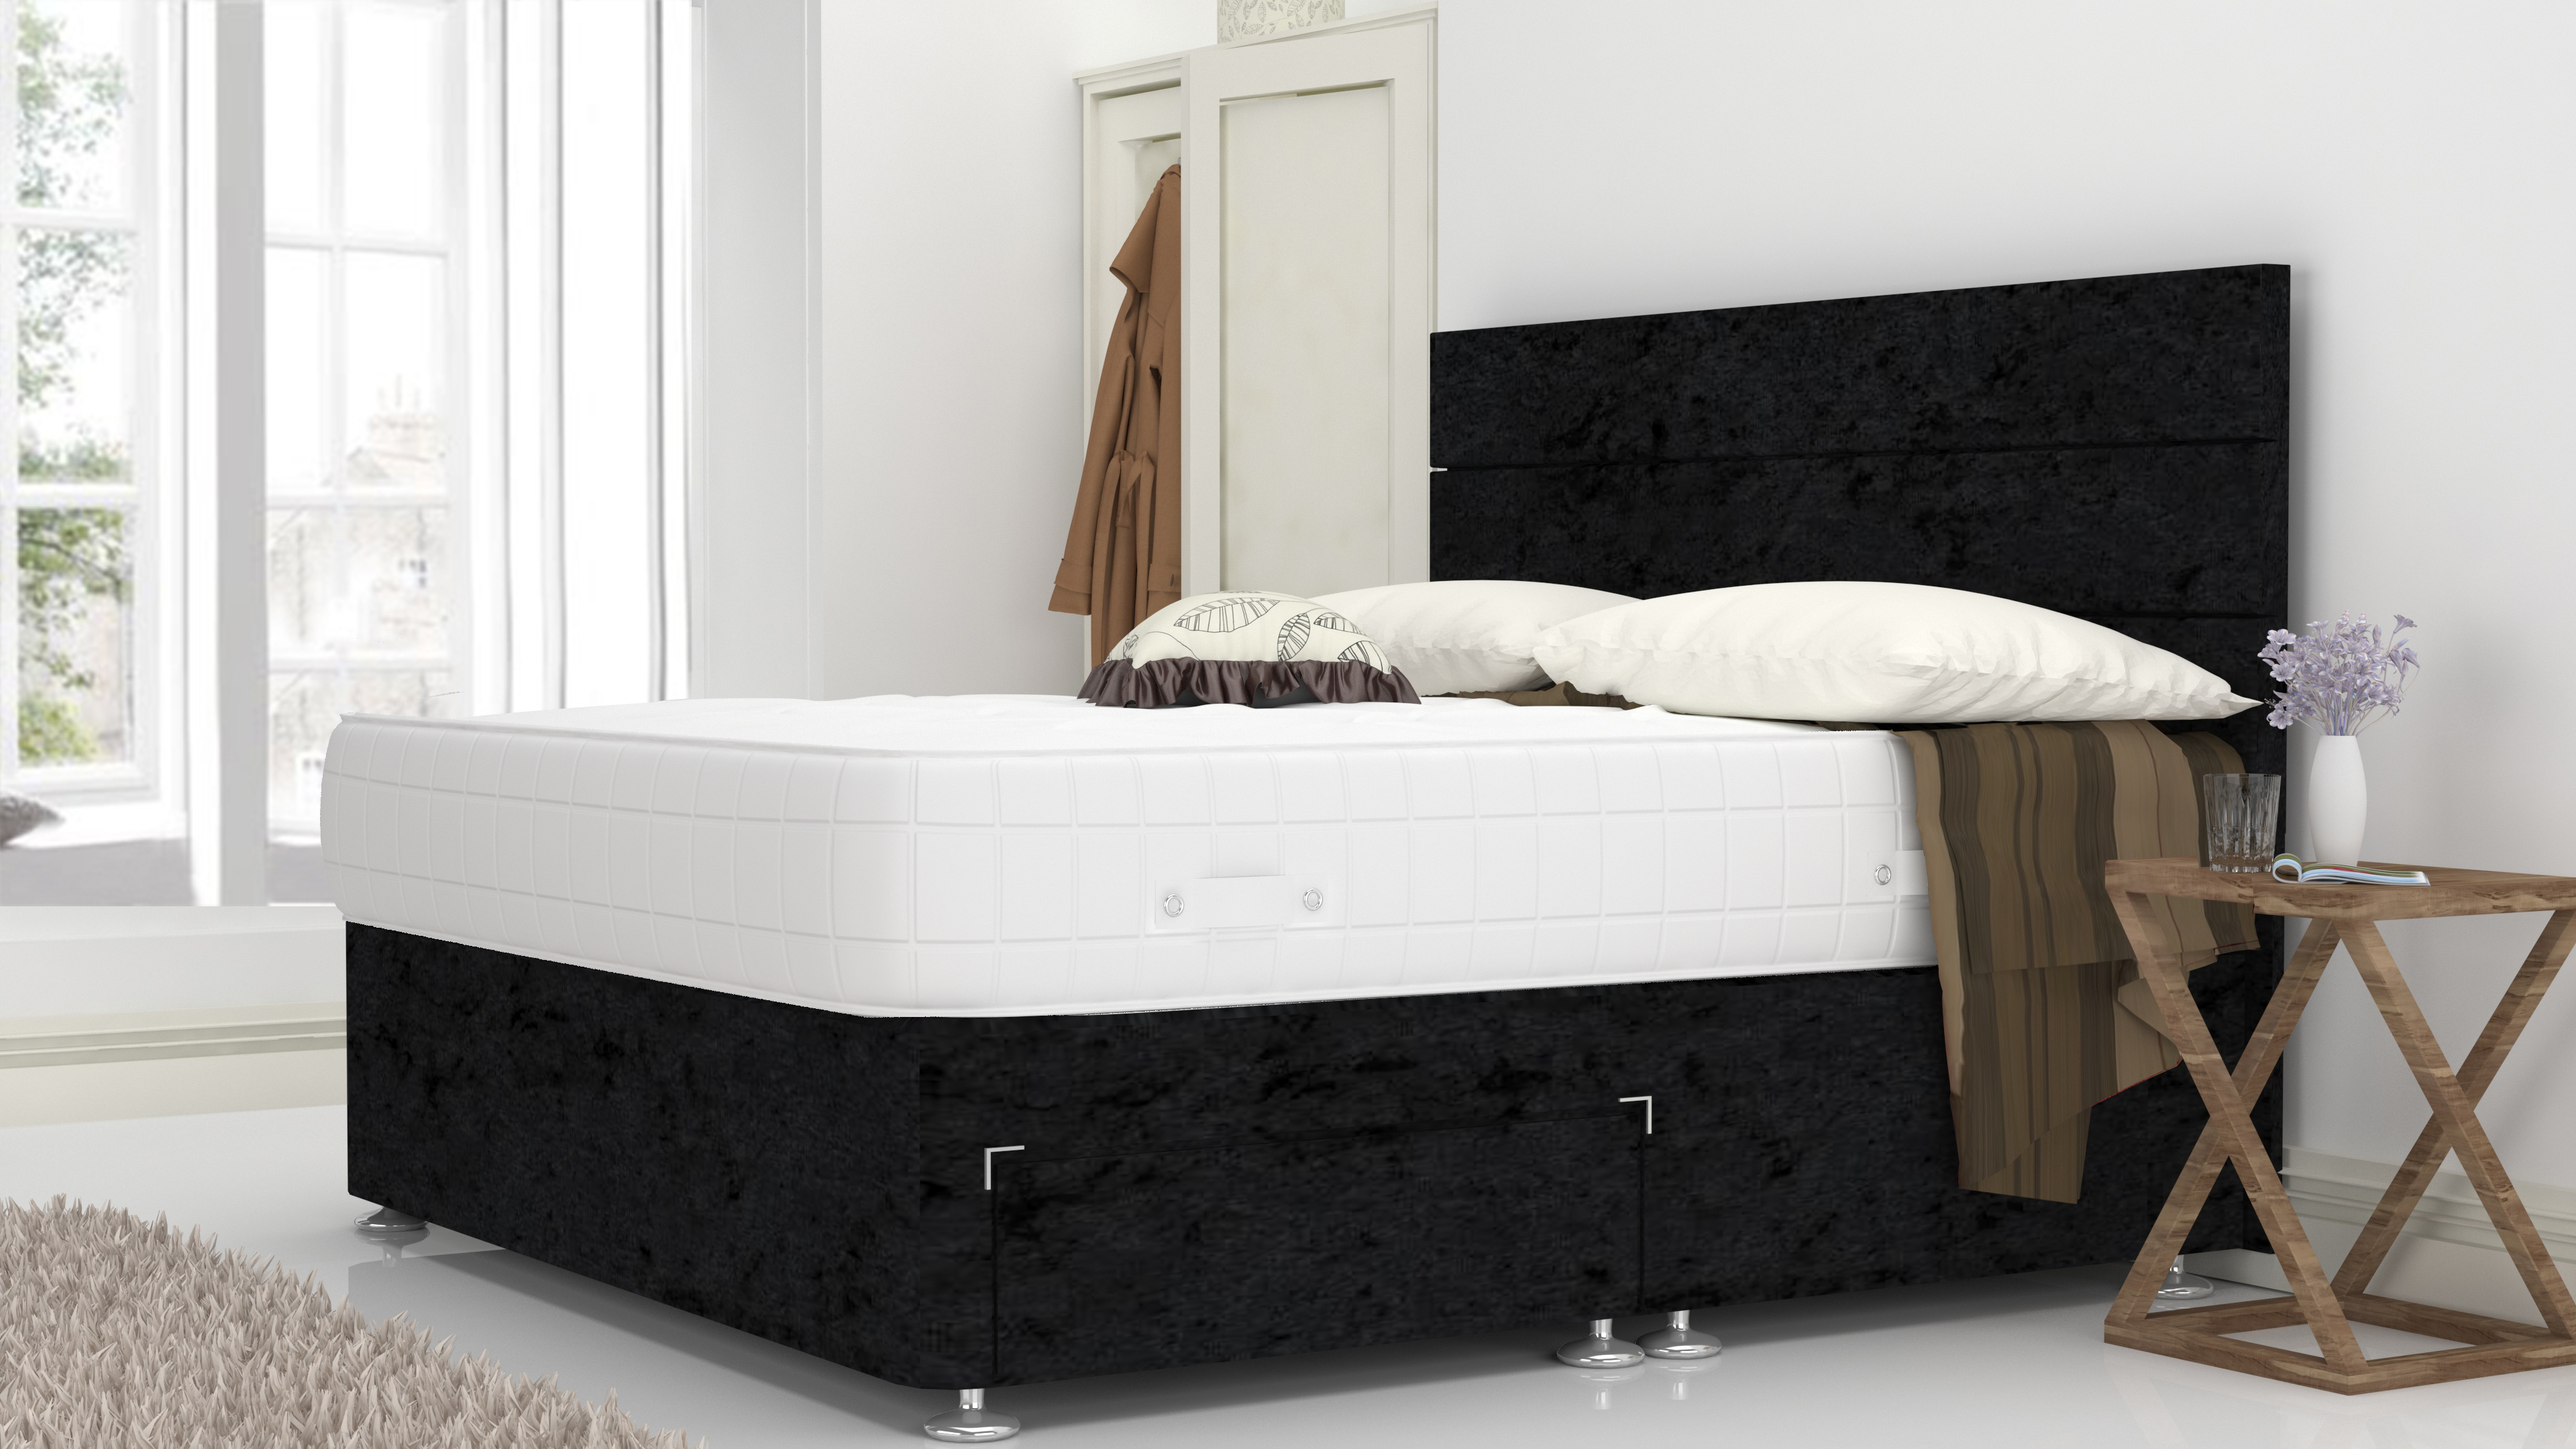 Black Crushed 6 Feet Divan Bed Set With 3 Panel Headboard (Included Feet) And Free Pillow Top Mattress